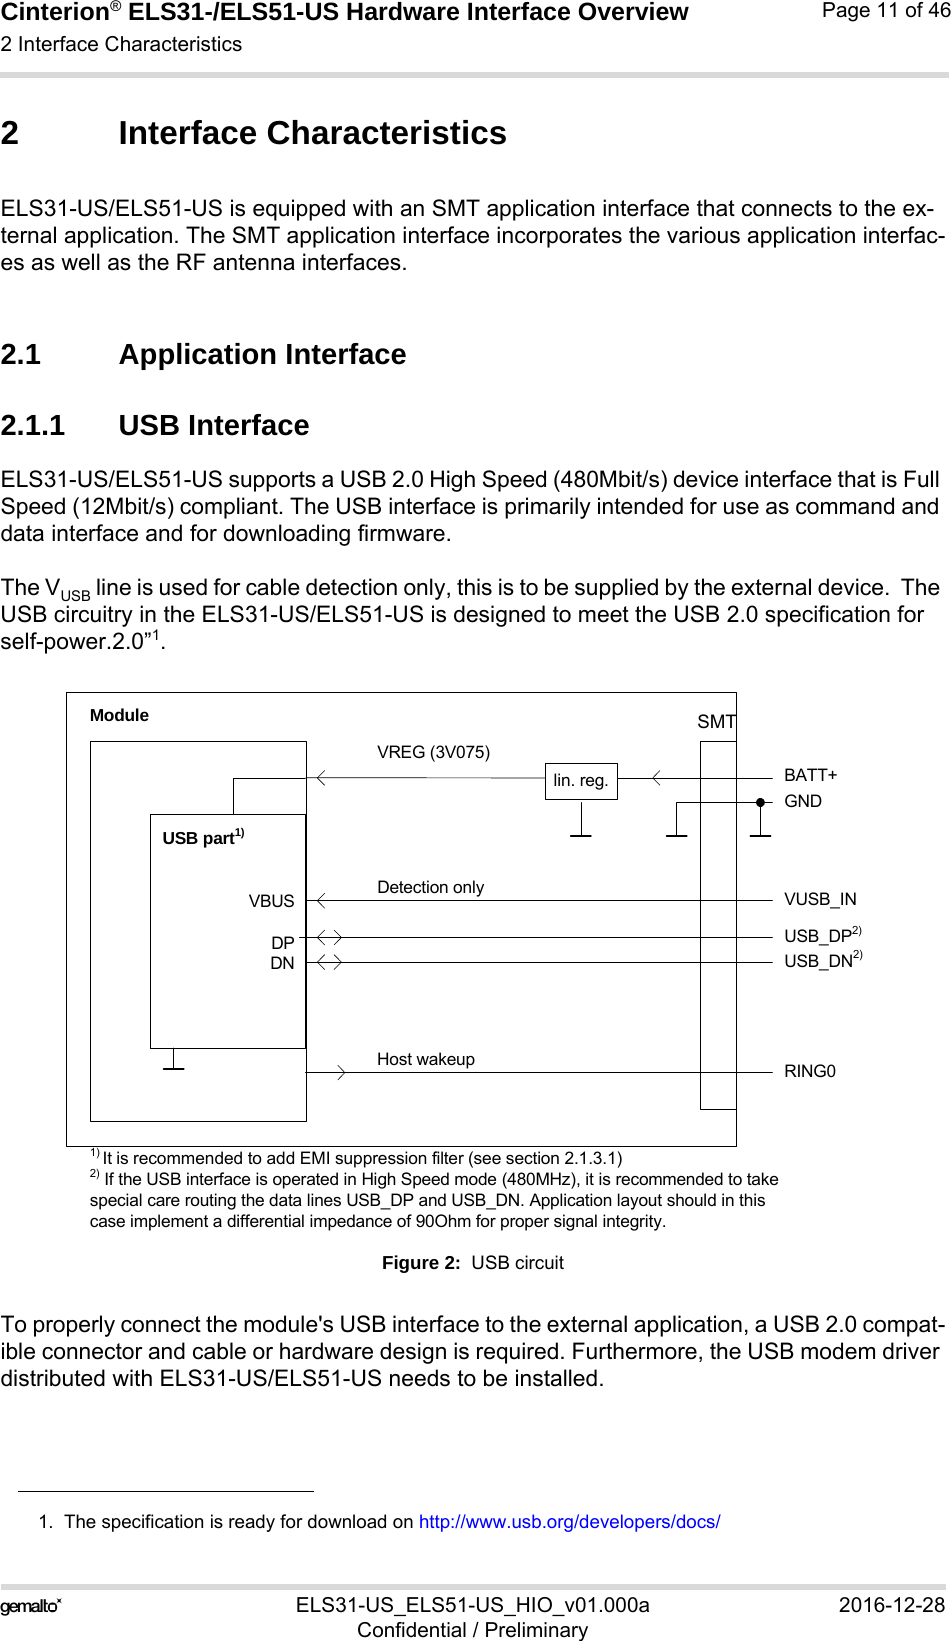 Cinterion® ELS31-/ELS51-US Hardware Interface Overview2 Interface Characteristics29ELS31-US_ELS51-US_HIO_v01.000a 2016-12-28Confidential / PreliminaryPage 11 of 462 Interface CharacteristicsELS31-US/ELS51-US is equipped with an SMT application interface that connects to the ex-ternal application. The SMT application interface incorporates the various application interfac-es as well as the RF antenna interfaces. 2.1 Application Interface2.1.1 USB InterfaceELS31-US/ELS51-US supports a USB 2.0 High Speed (480Mbit/s) device interface that is Full Speed (12Mbit/s) compliant. The USB interface is primarily intended for use as command and data interface and for downloading firmware. The VUSB line is used for cable detection only, this is to be supplied by the external device.  The USB circuitry in the ELS31-US/ELS51-US is designed to meet the USB 2.0 specification for self-power.2.0”1.Figure 2:  USB circuitTo properly connect the module&apos;s USB interface to the external application, a USB 2.0 compat-ible connector and cable or hardware design is required. Furthermore, the USB modem driver distributed with ELS31-US/ELS51-US needs to be installed.1.  The specification is ready for download on http://www.usb.org/developers/docs/VBUSDPDNVREG (3V075)BATT+USB_DP2)lin. reg.GNDModuleDetection only VUSB_INUSB part1)RING0Host wakeup1) It is recommended to add EMI suppression filter (see section 2.1.3.1)USB_DN2)2) If the USB interface is operated in High Speed mode (480MHz), it is recommended to take special care routing the data lines USB_DP and USB_DN. Application layout should in this case implement a differential impedance of 90Ohm for proper signal integrity.SMT